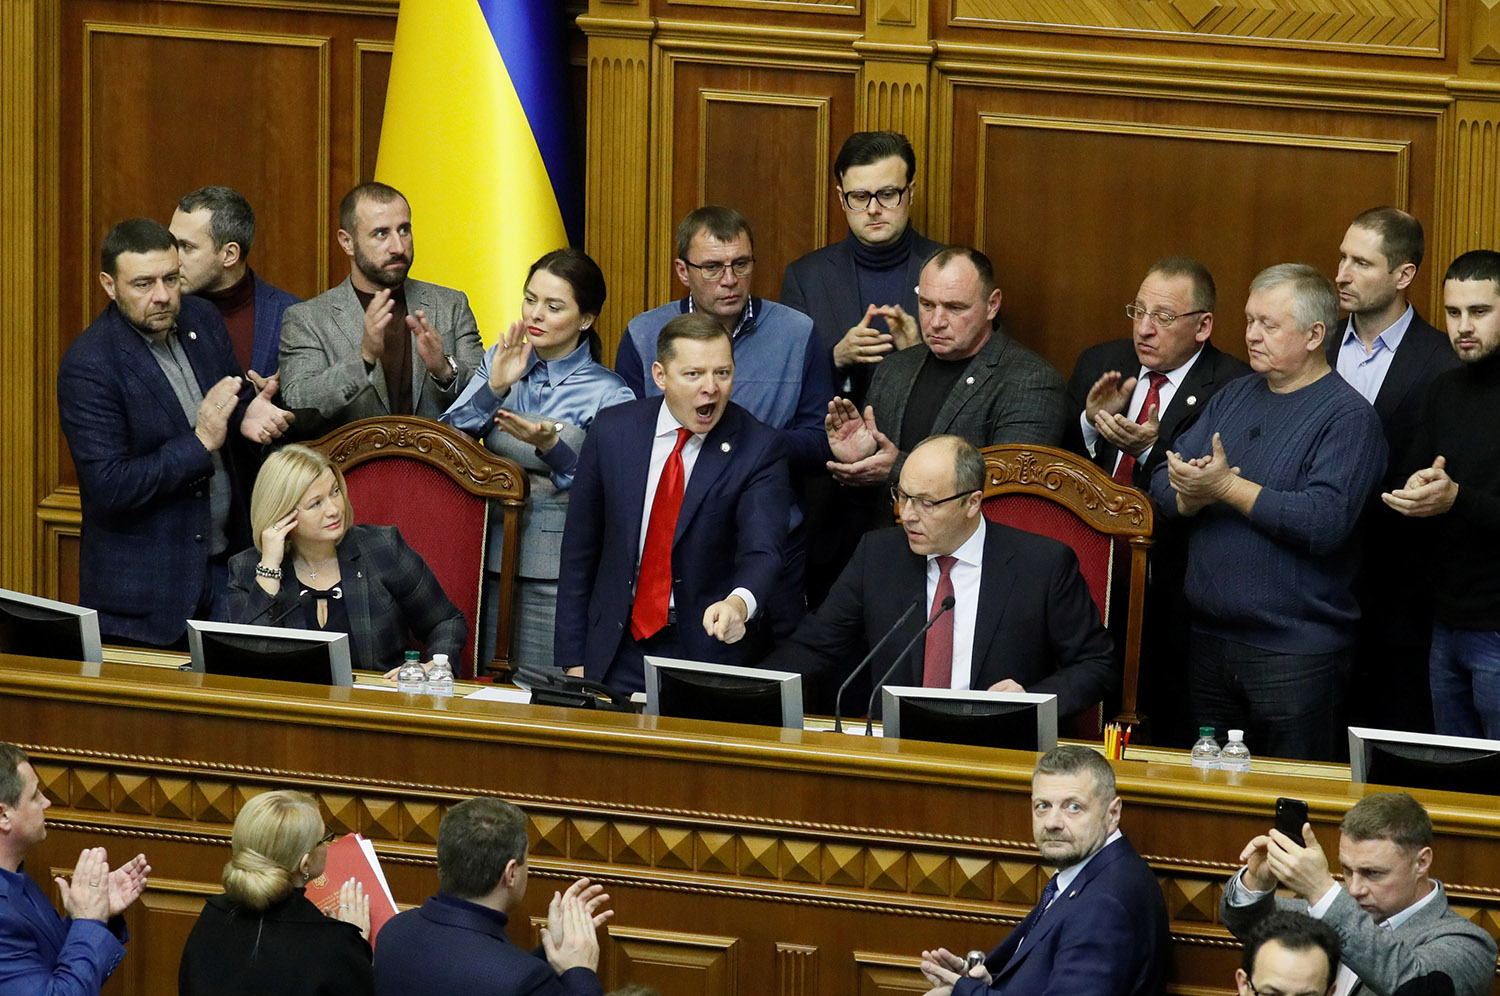 Radical party leader Oleh Lyashko (C) attends a parliament session to review a proposal by Ukrainian President Petro Poroshenko to introduce martial law for 60 days after Russia seized Ukrainian naval ships off the coast of Russia-annexed Crimea, in Kiev, Ukraine November 26, 2018. REUTERS/Valentyn Ogirenko